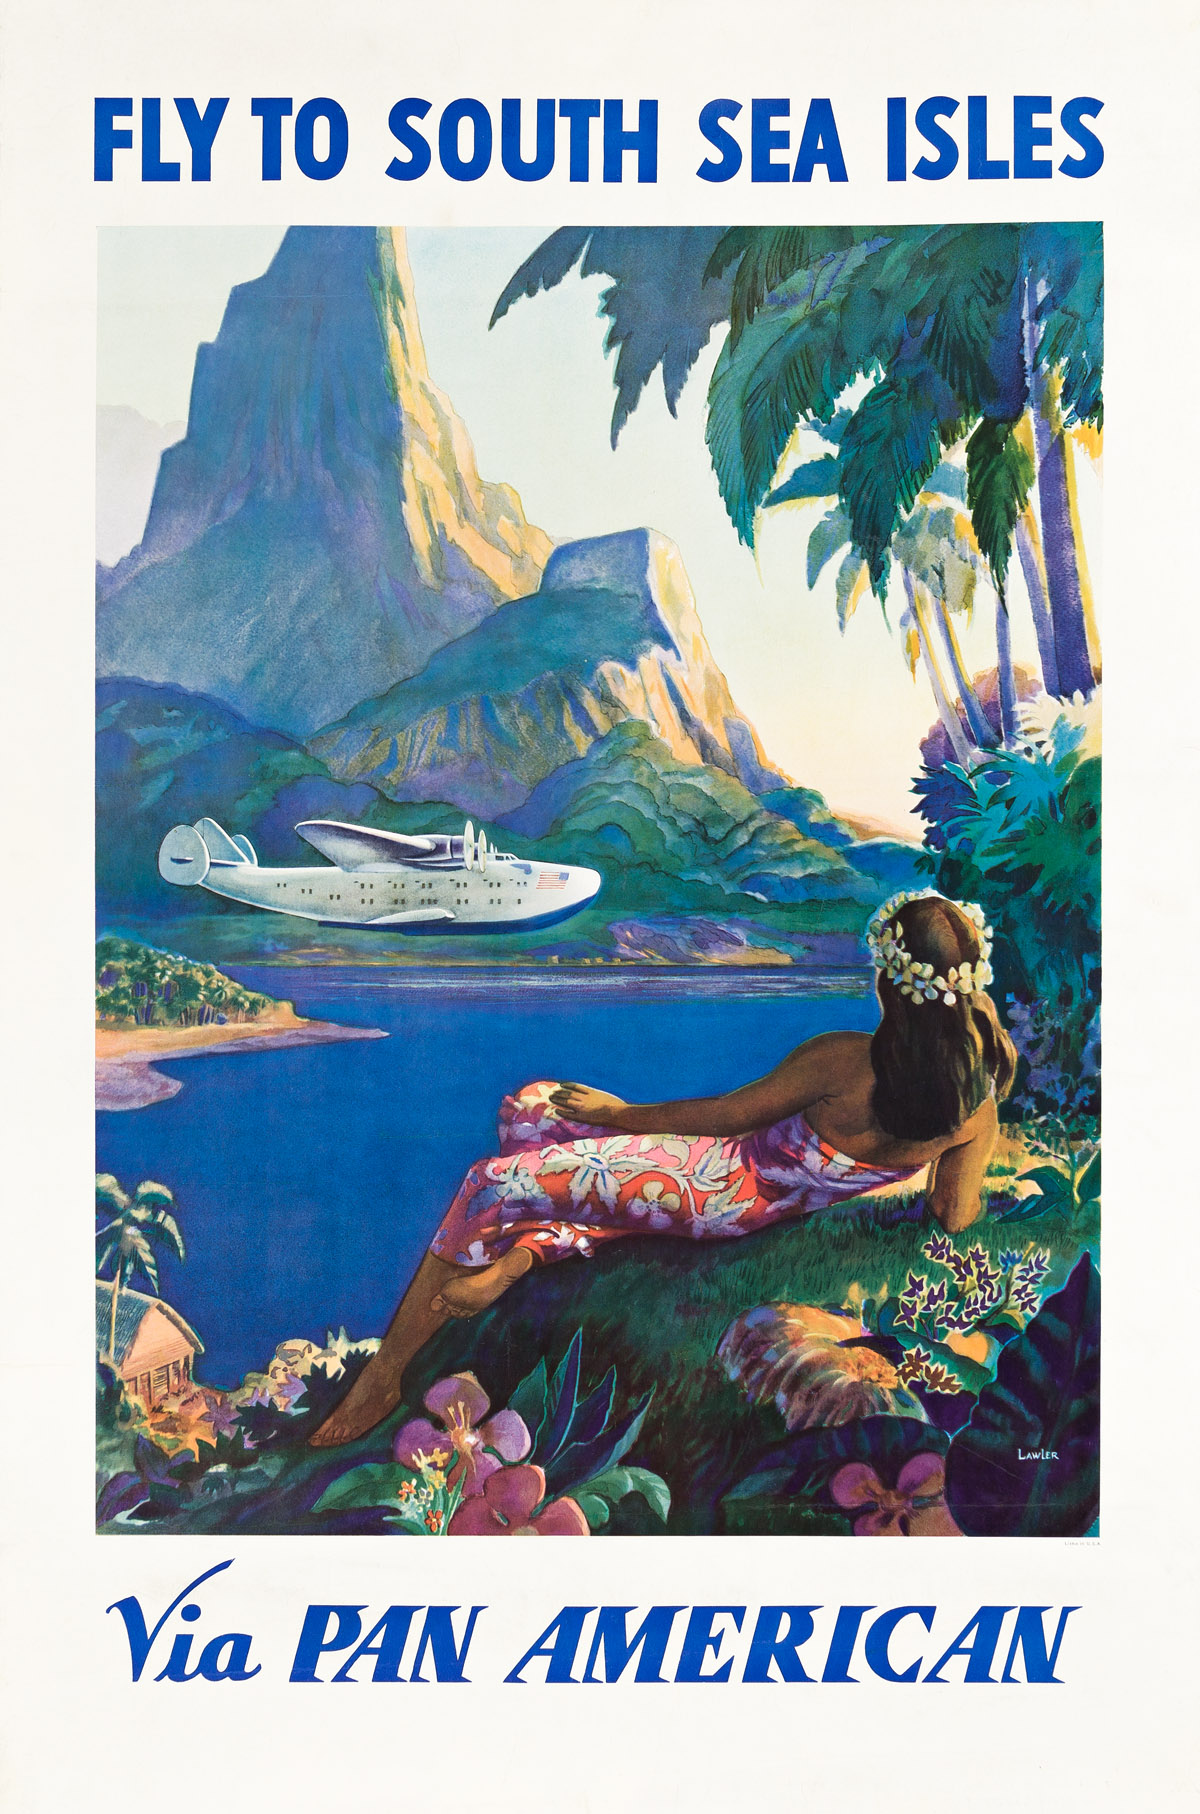 PAUL GEORGE LAWLER (DATES UNKNOWN).  FLY TO SOUTH SEA ISLES / VIA PAN AMERICAN. Circa 1938. 41x27¼ inches, 104x69¼ cm.